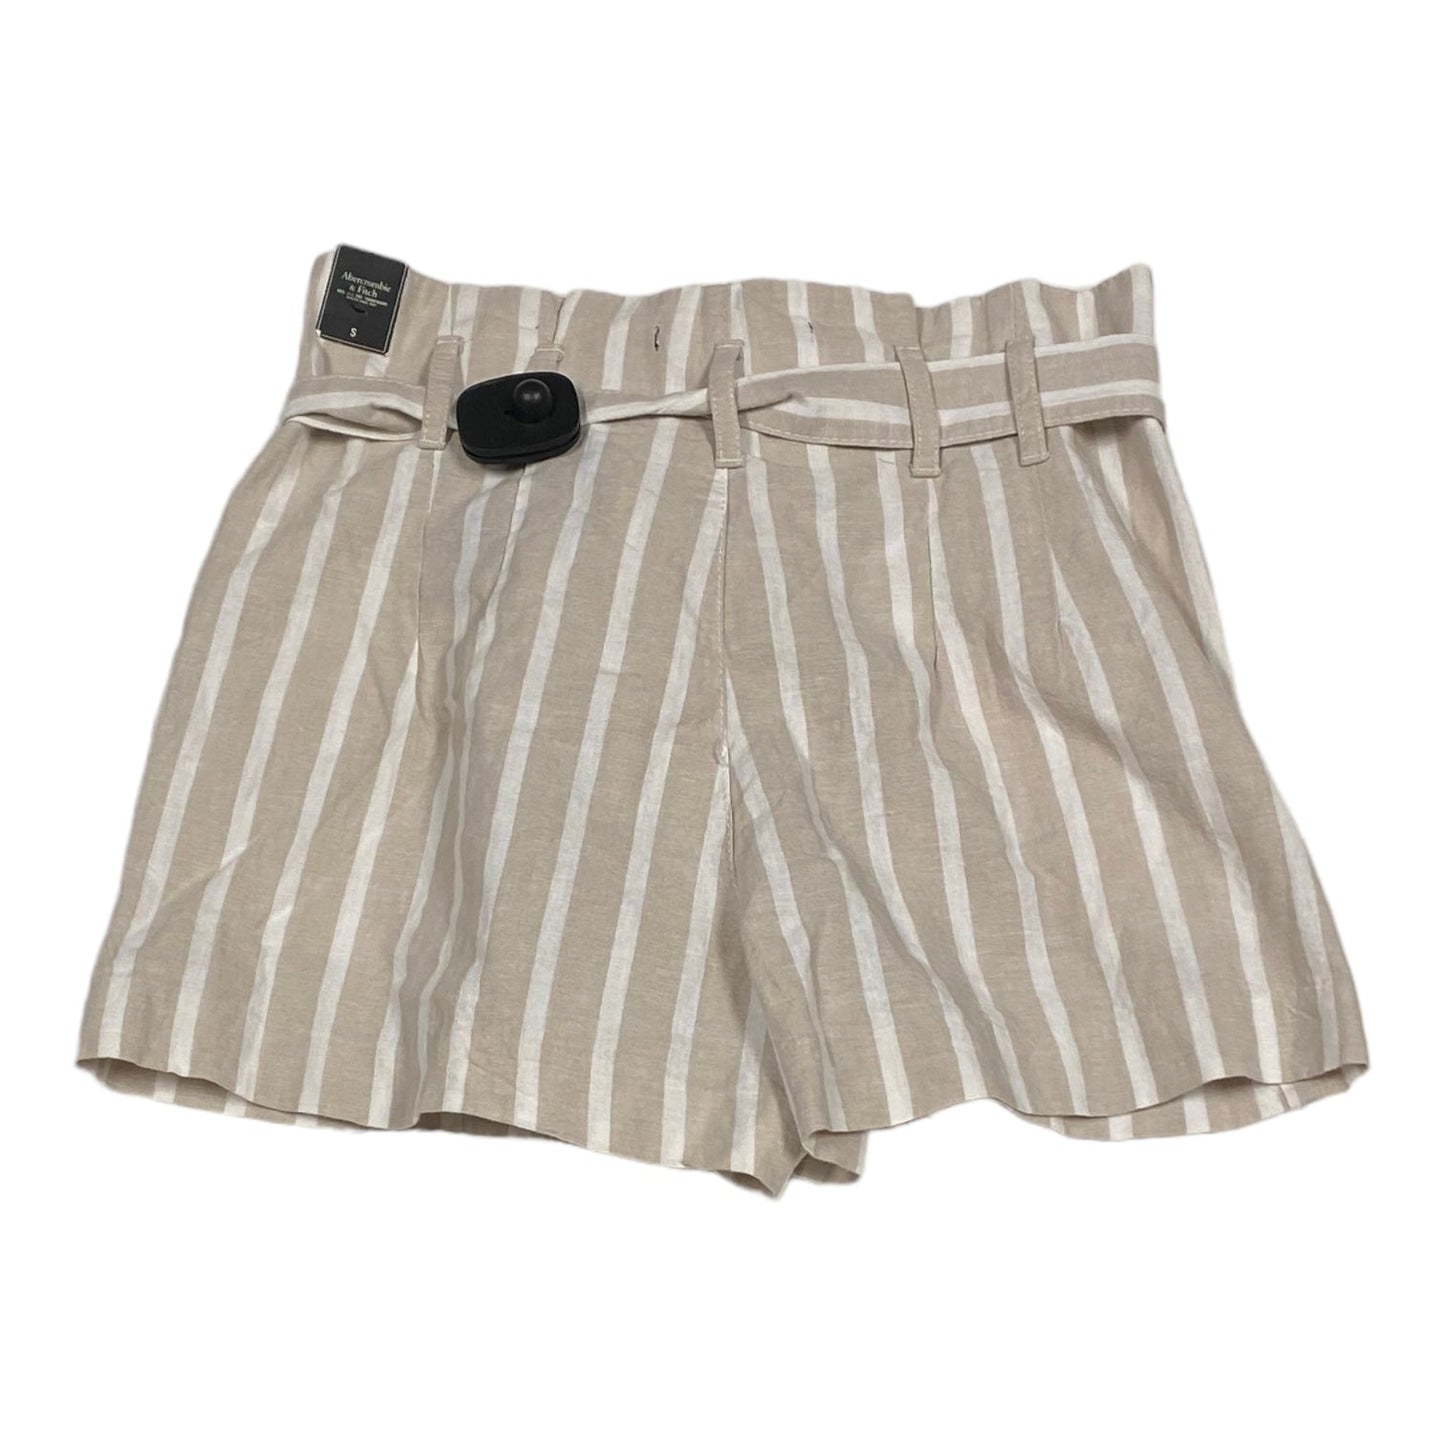 Shorts By Abercrombie And Fitch  Size: S